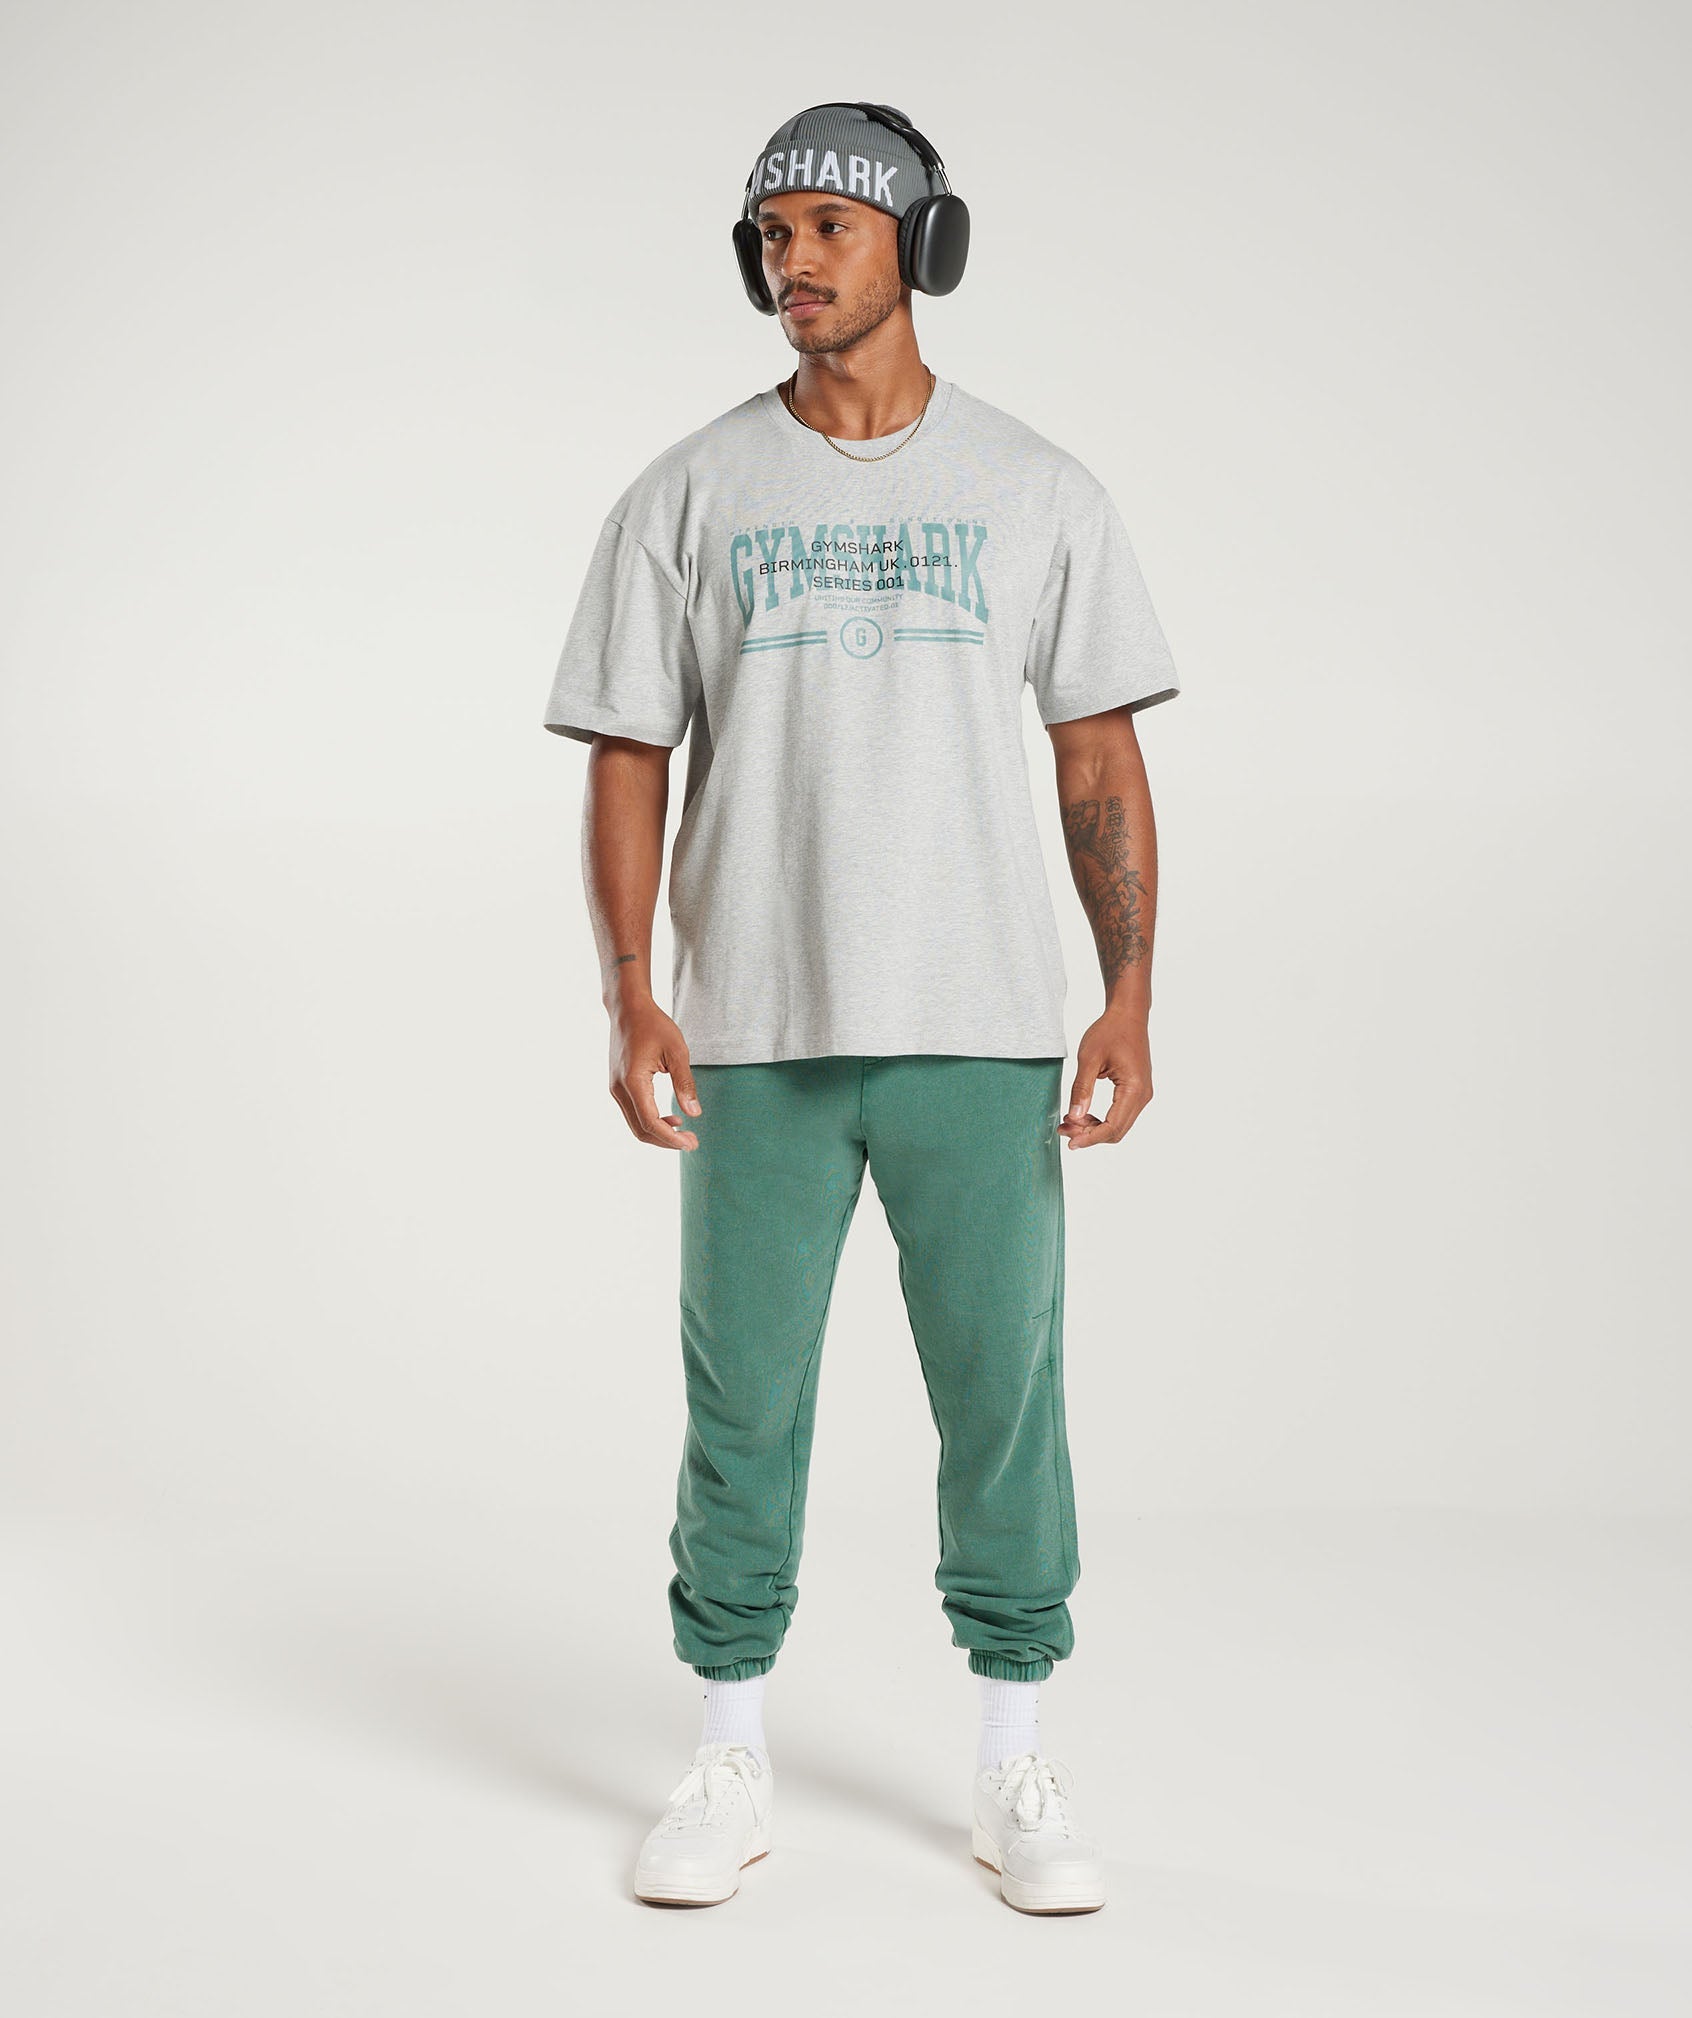 Collegiate Oversized T-Shirt in Light Grey Core Marl - view 4